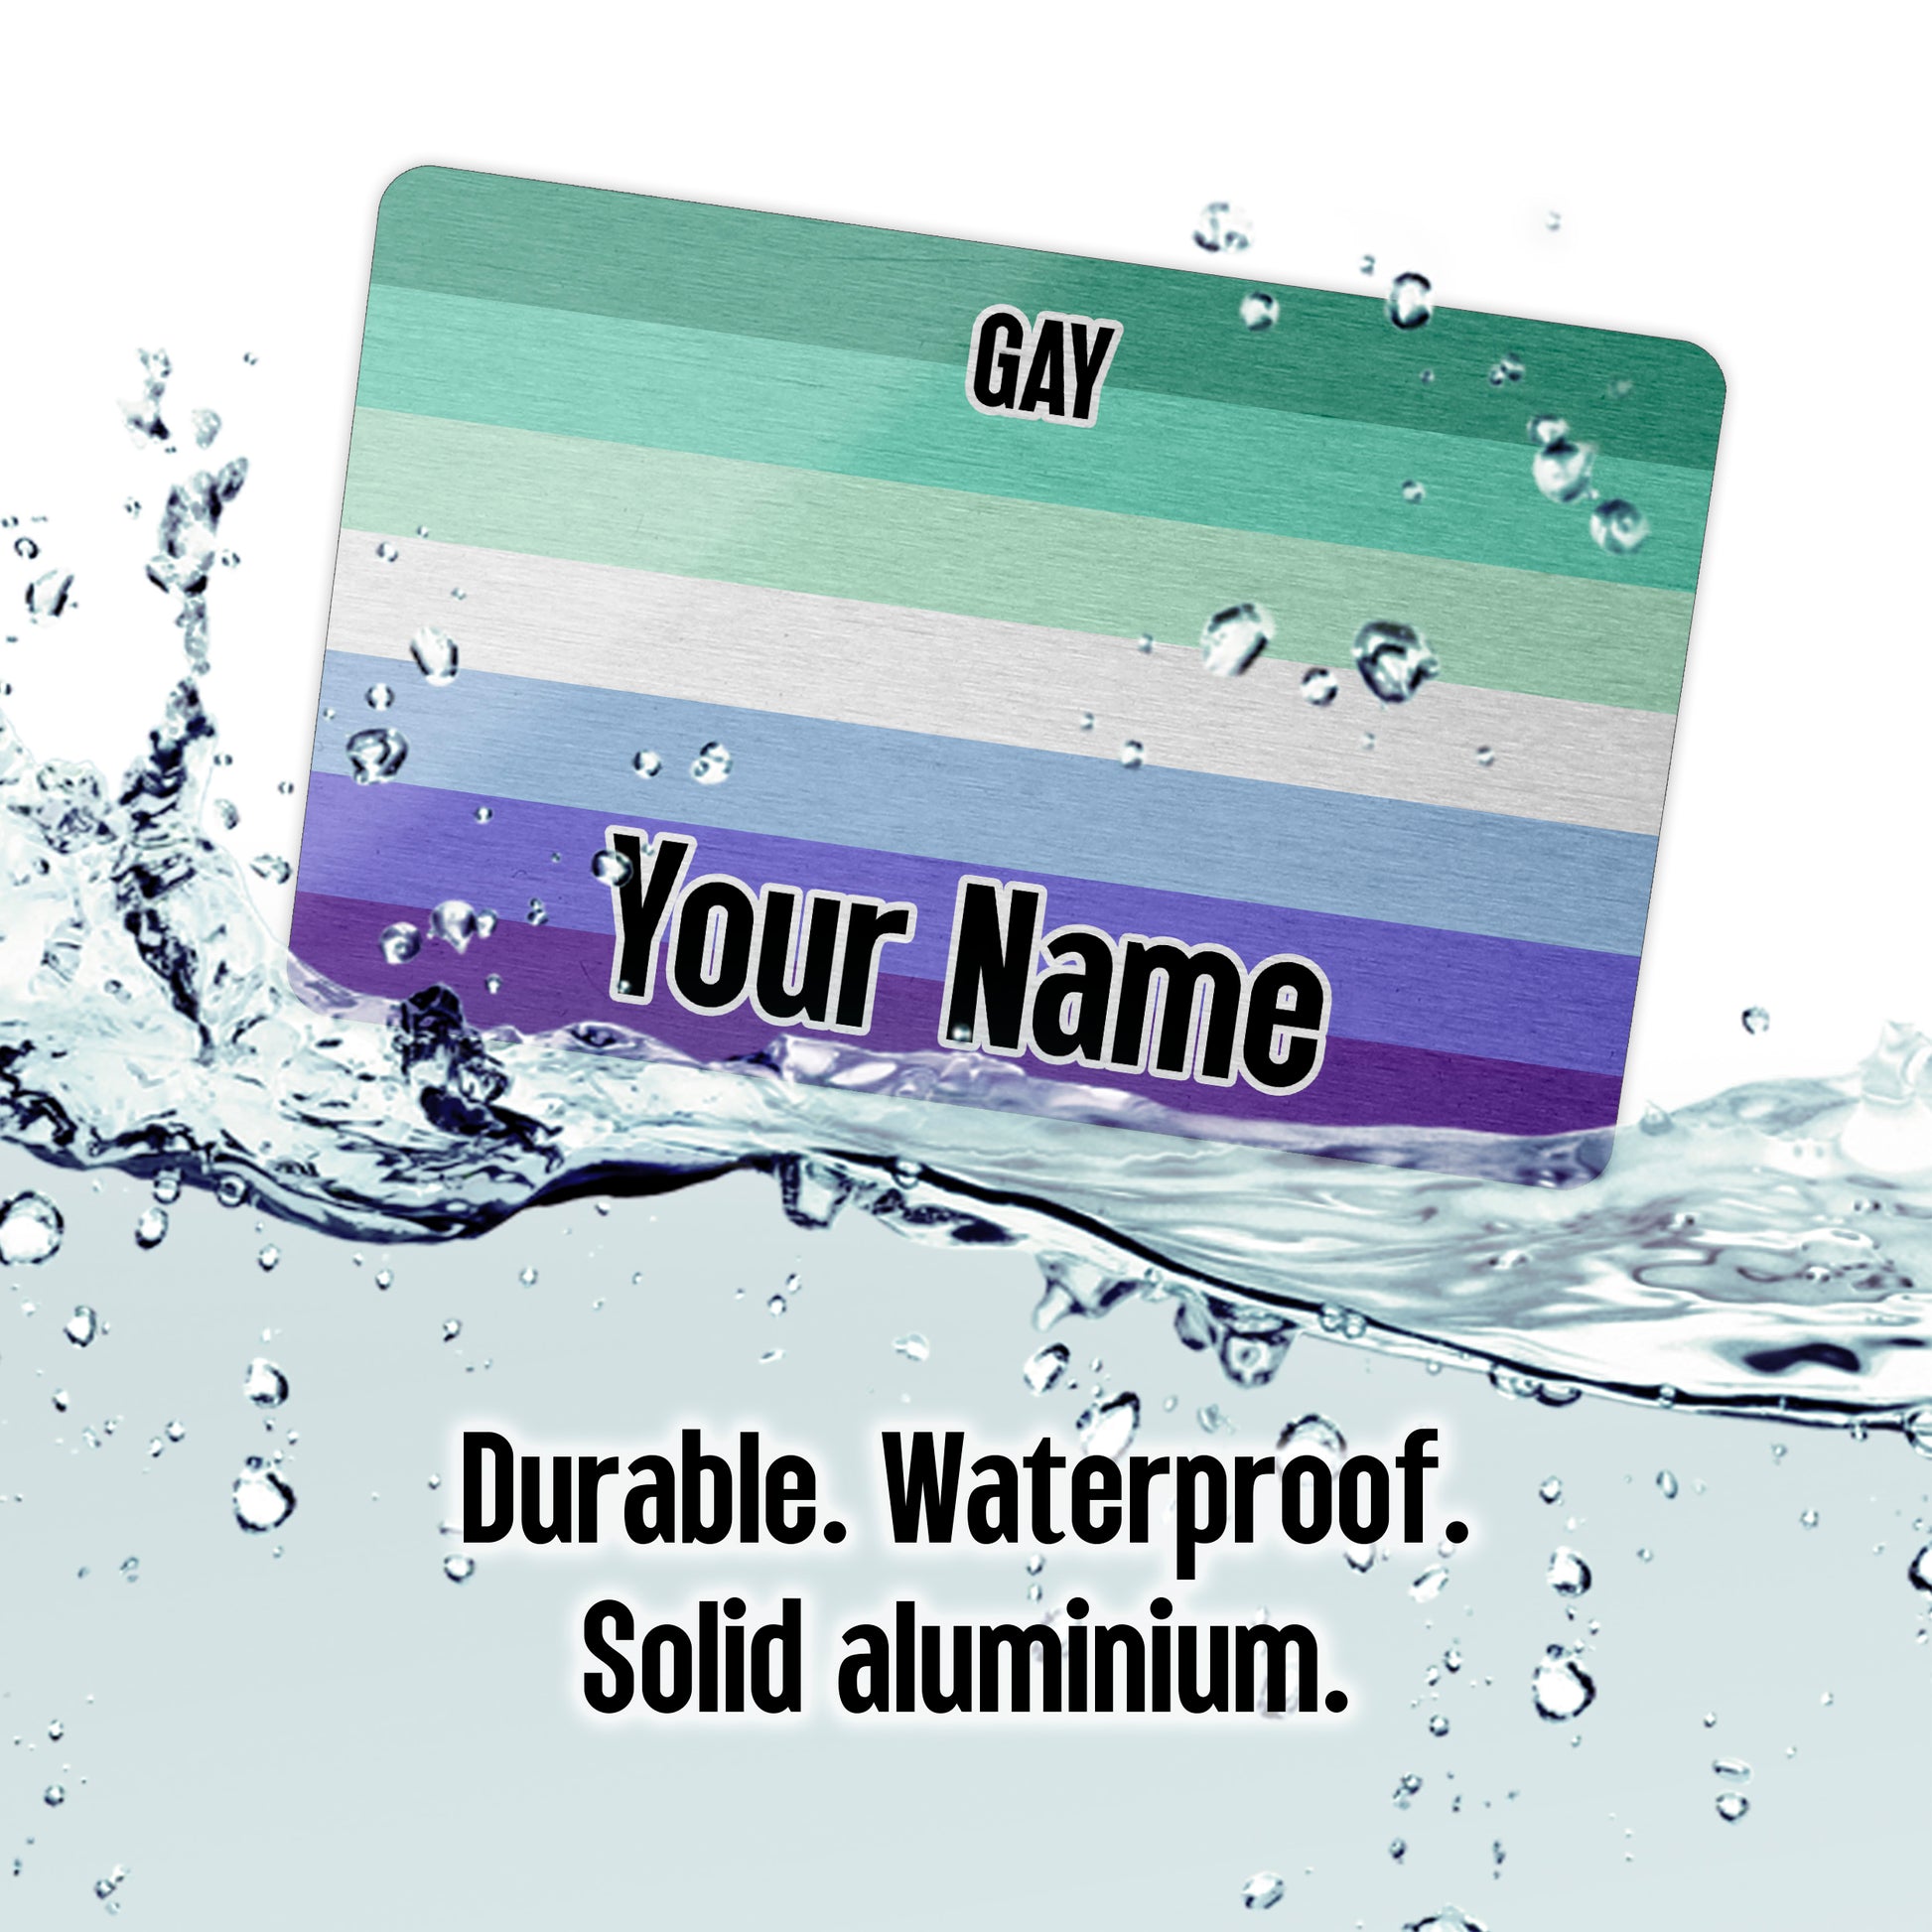 Aluminium wallet card personalised with your name and the men loving men gay pride flag